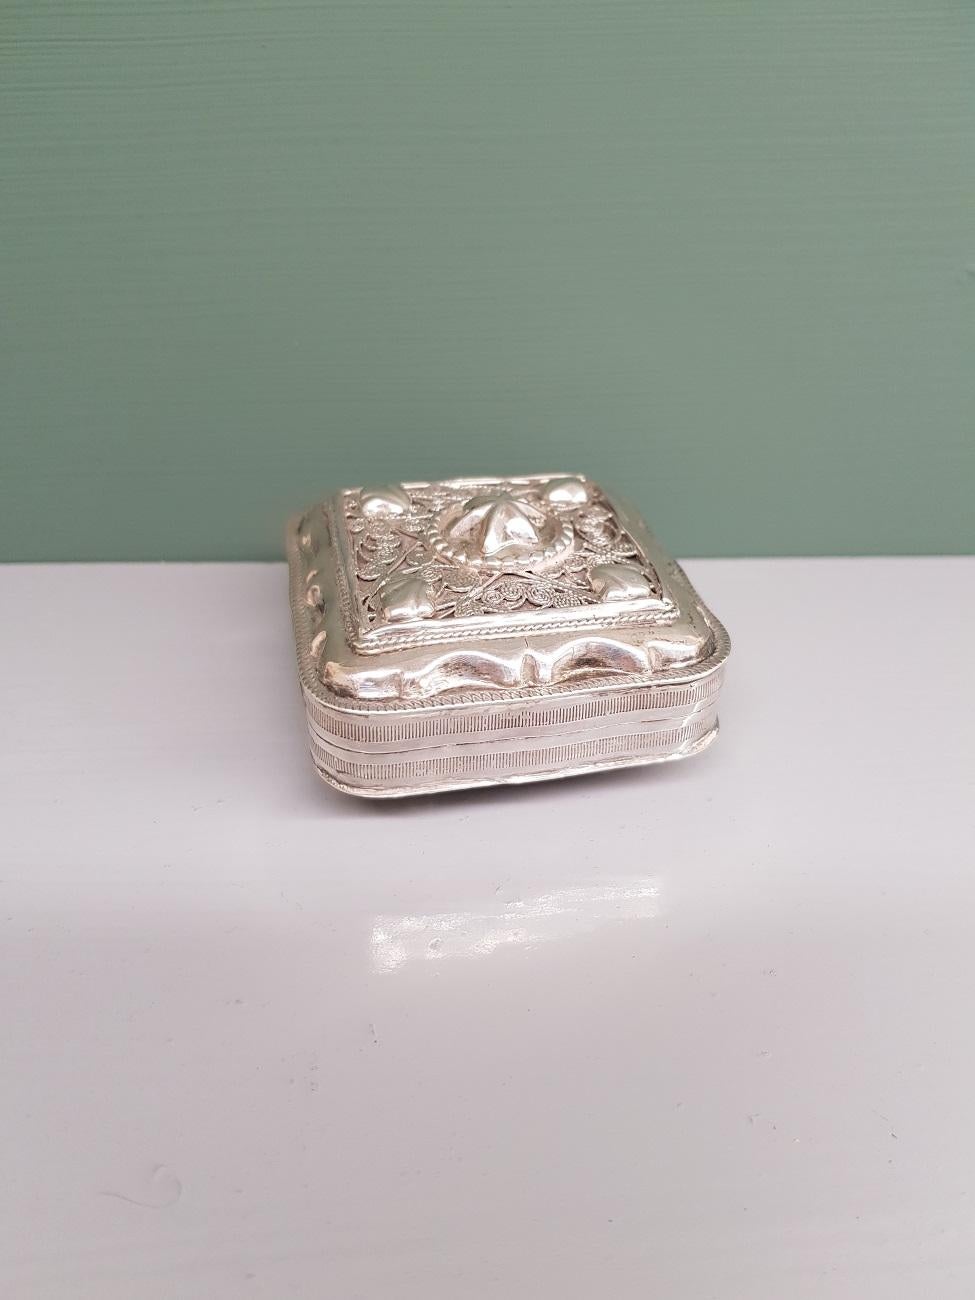 Antique Dutch silver pill box with filigree decoration, it is marked with lion 2 and the letter P 1908 and made by Widow Hendrik Capoen.

The measurements are,
Depth 5.5 cm/ 2.1 inch.
Width 5.5 cm/ 2.1 inch.
Height 3 cm/ 1.1 inch.
Weight 57.5